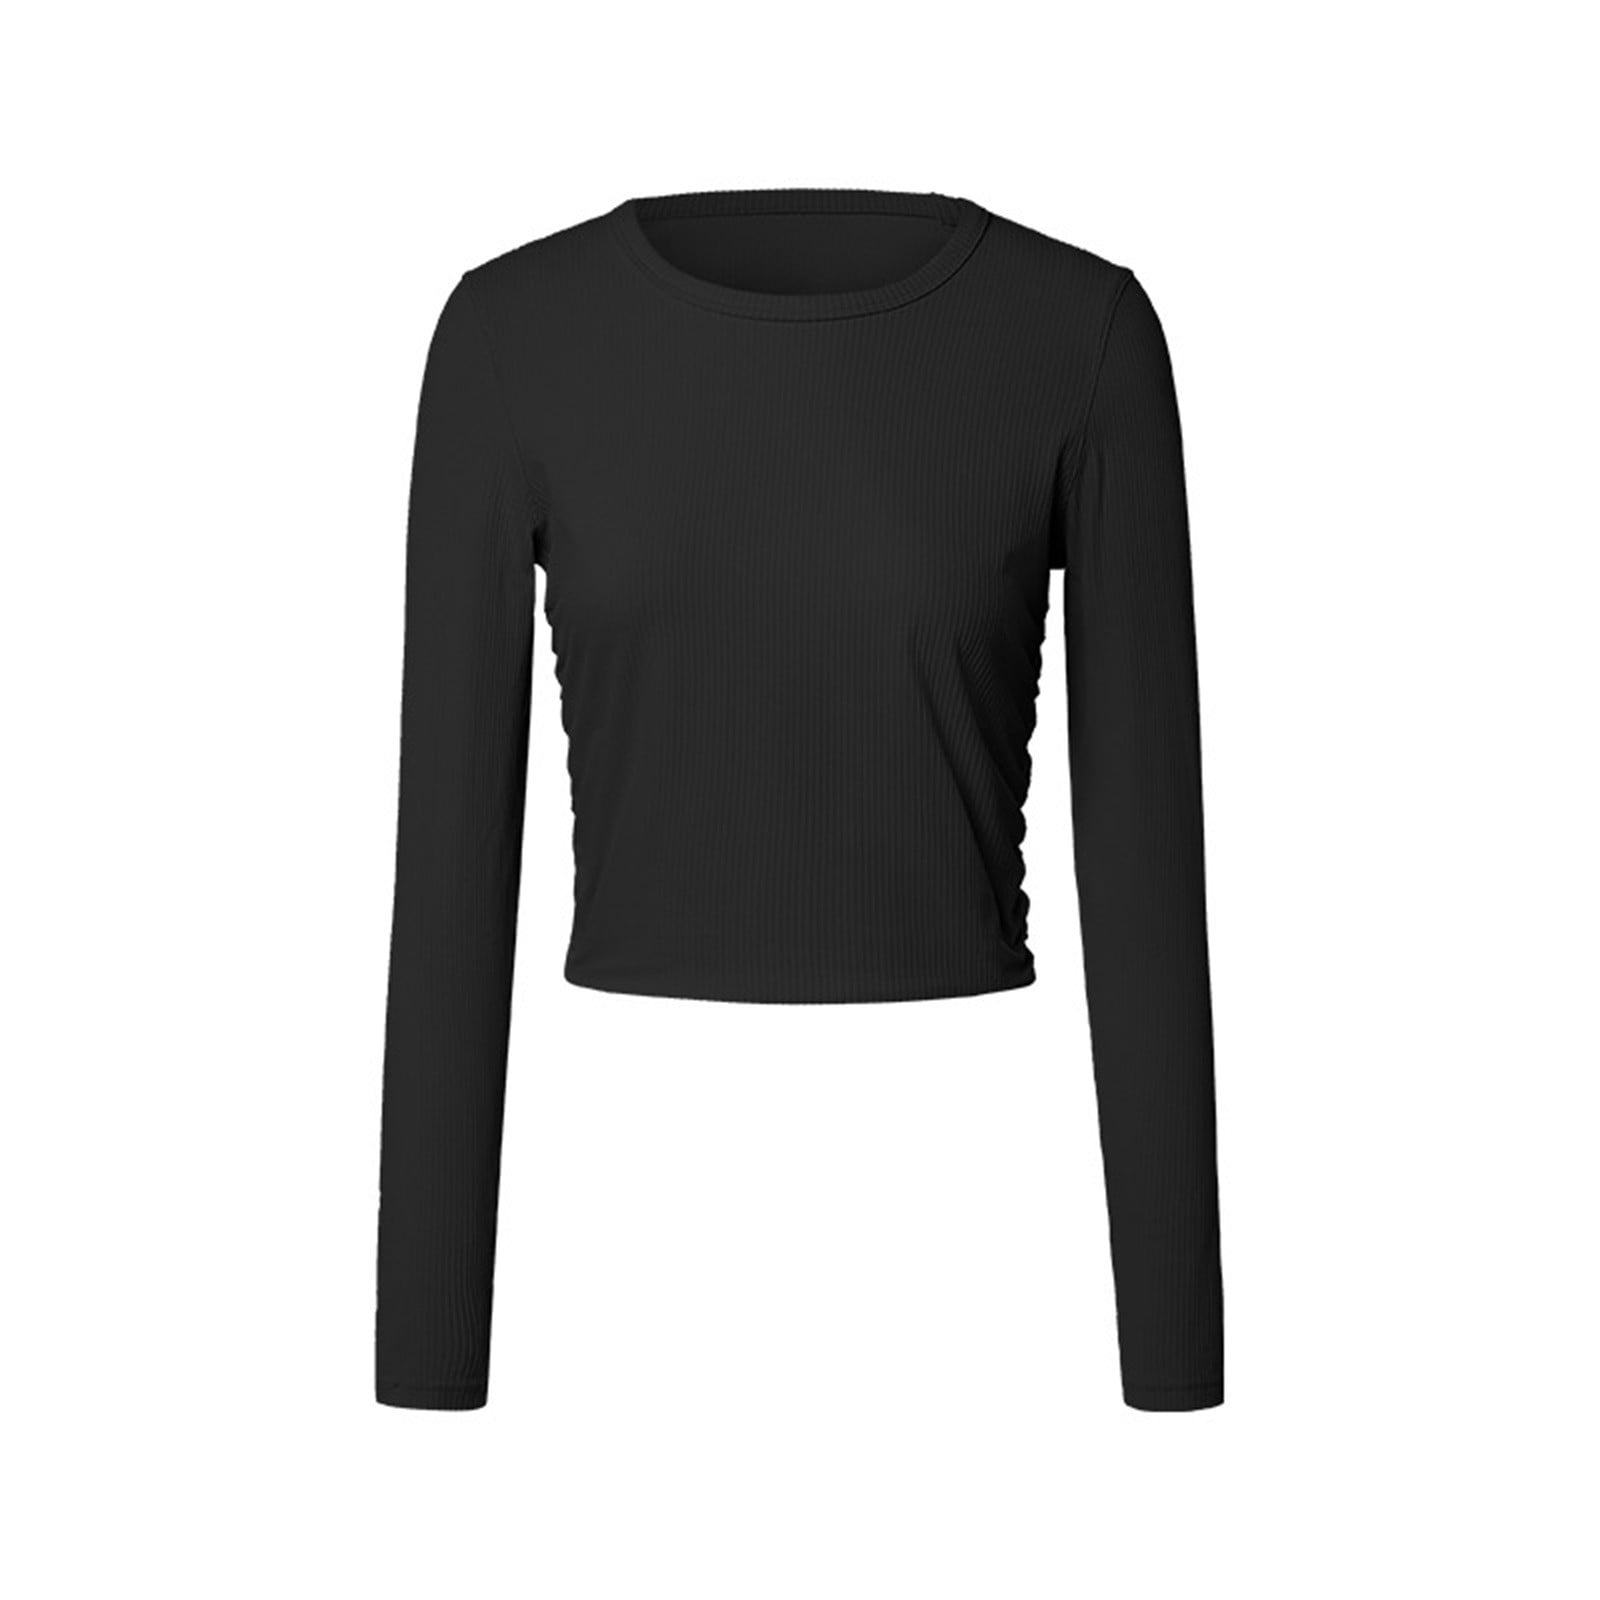 ZHIZAIHU Blouse for Women Running T Shirt Solid Color Ribbed Black ...